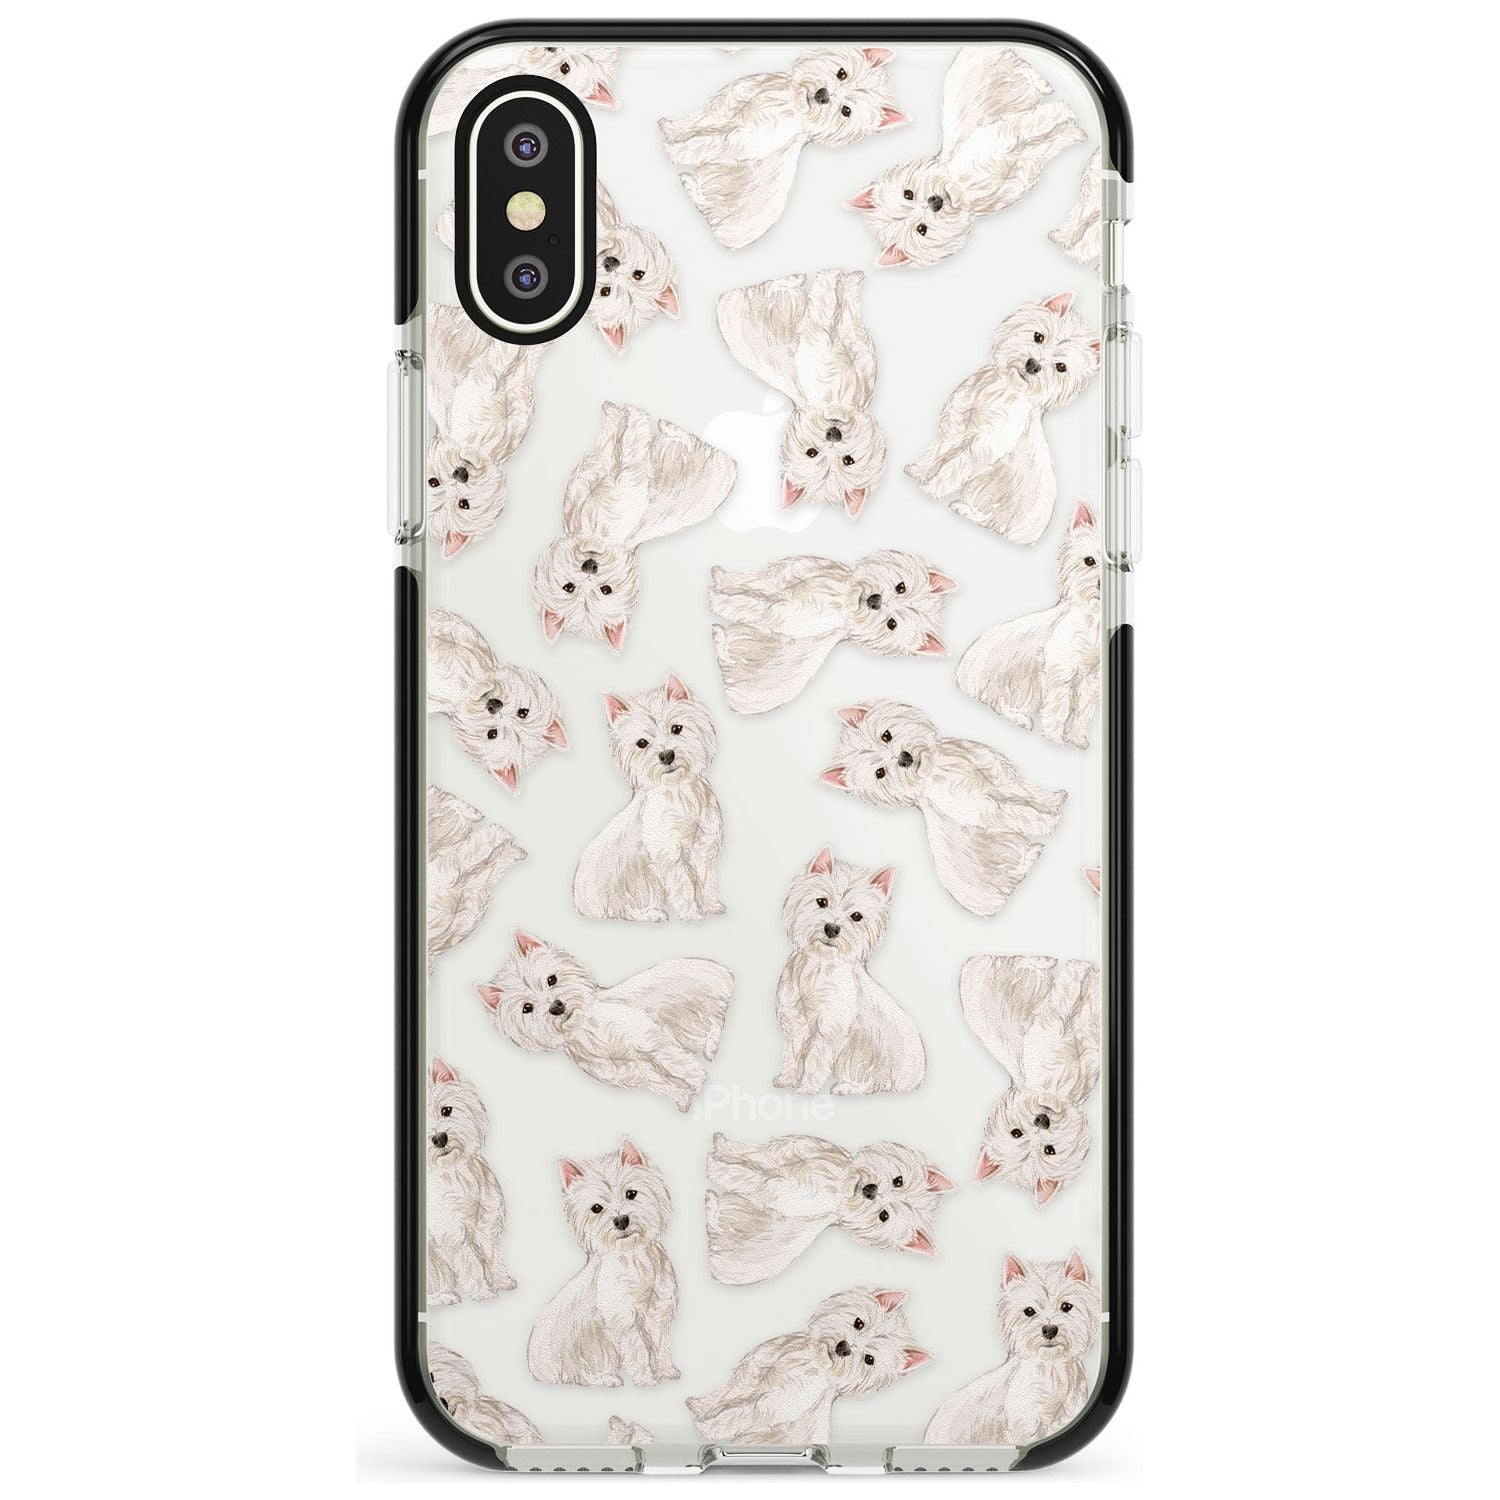 Westie Watercolour Dog Pattern Black Impact Phone Case for iPhone X XS Max XR